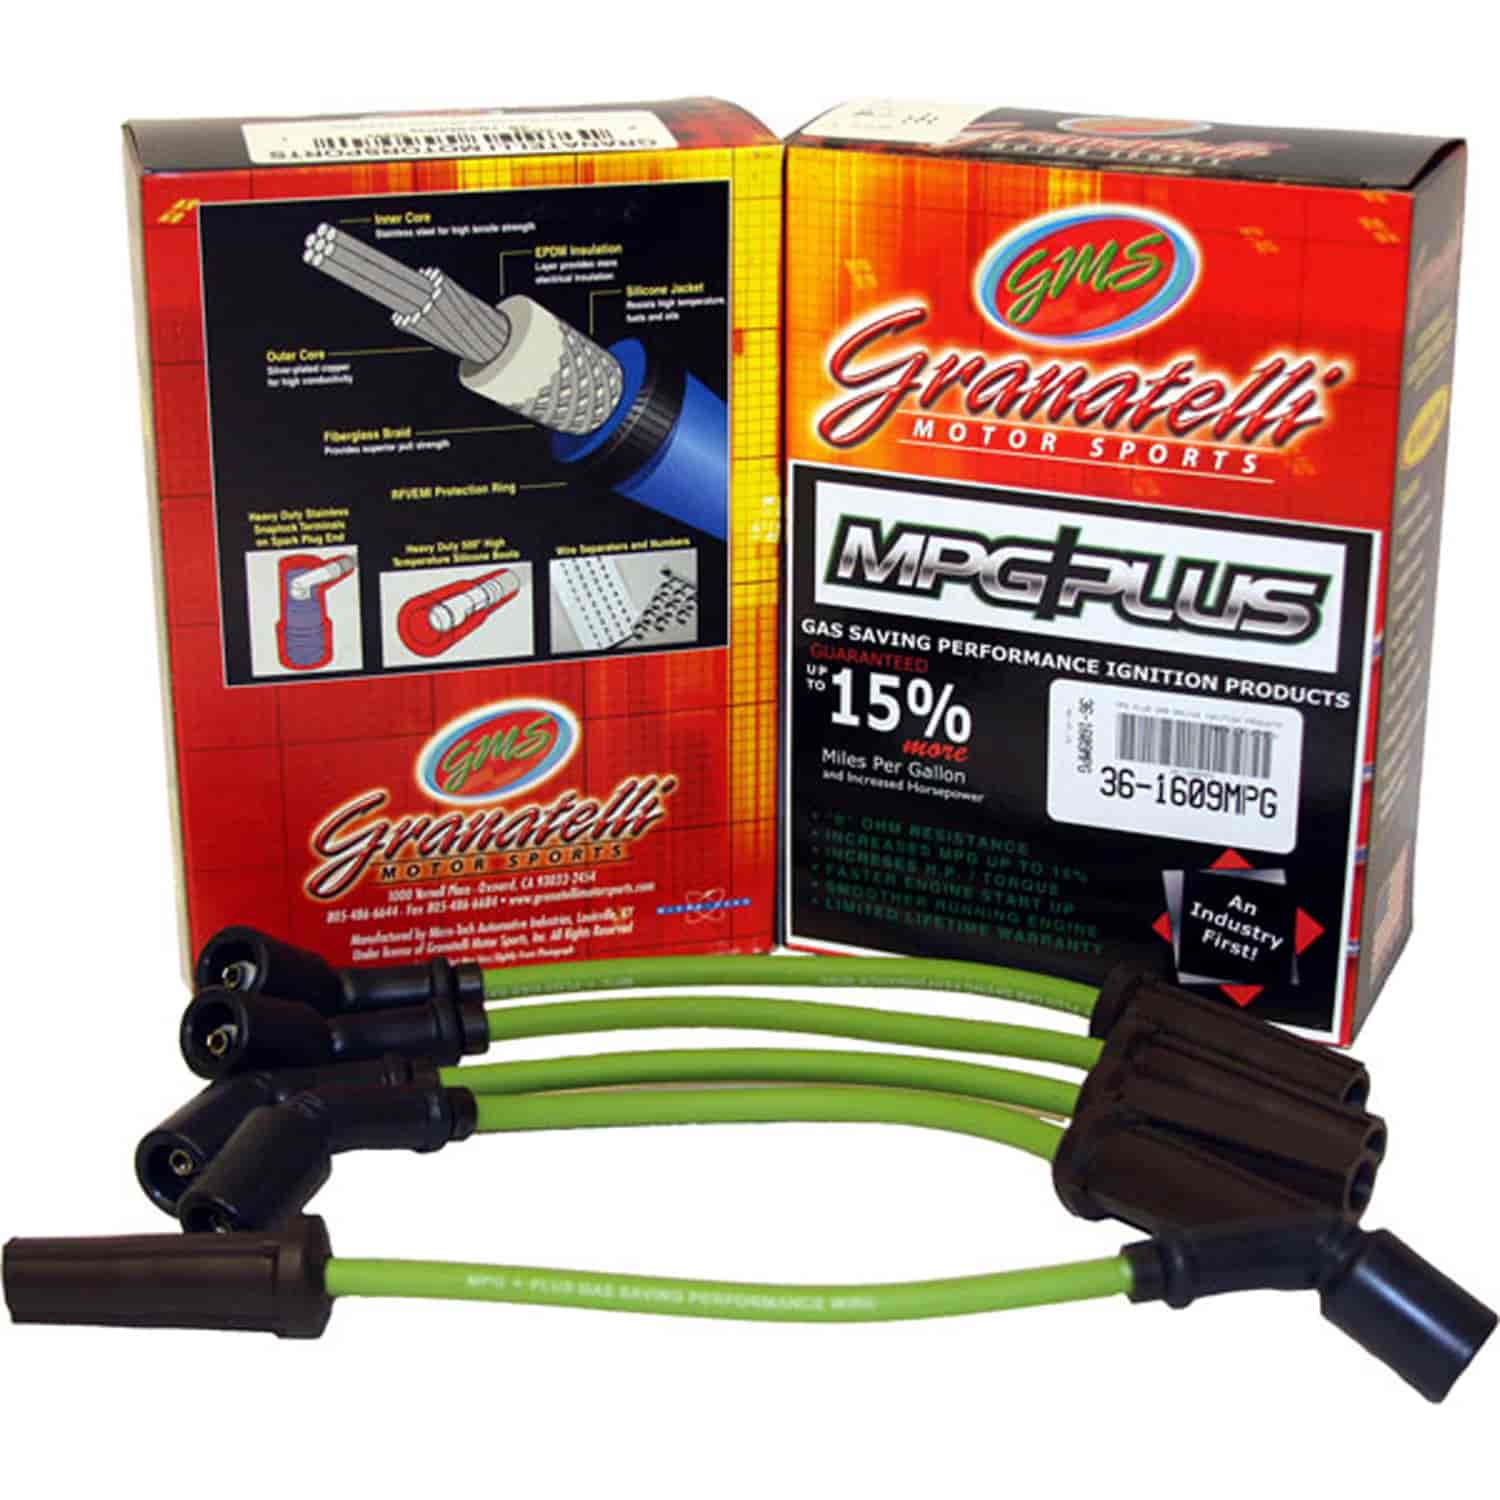 MPG Wires TOYOTA 4 RUNNER 4CYL 2.7L 97-00